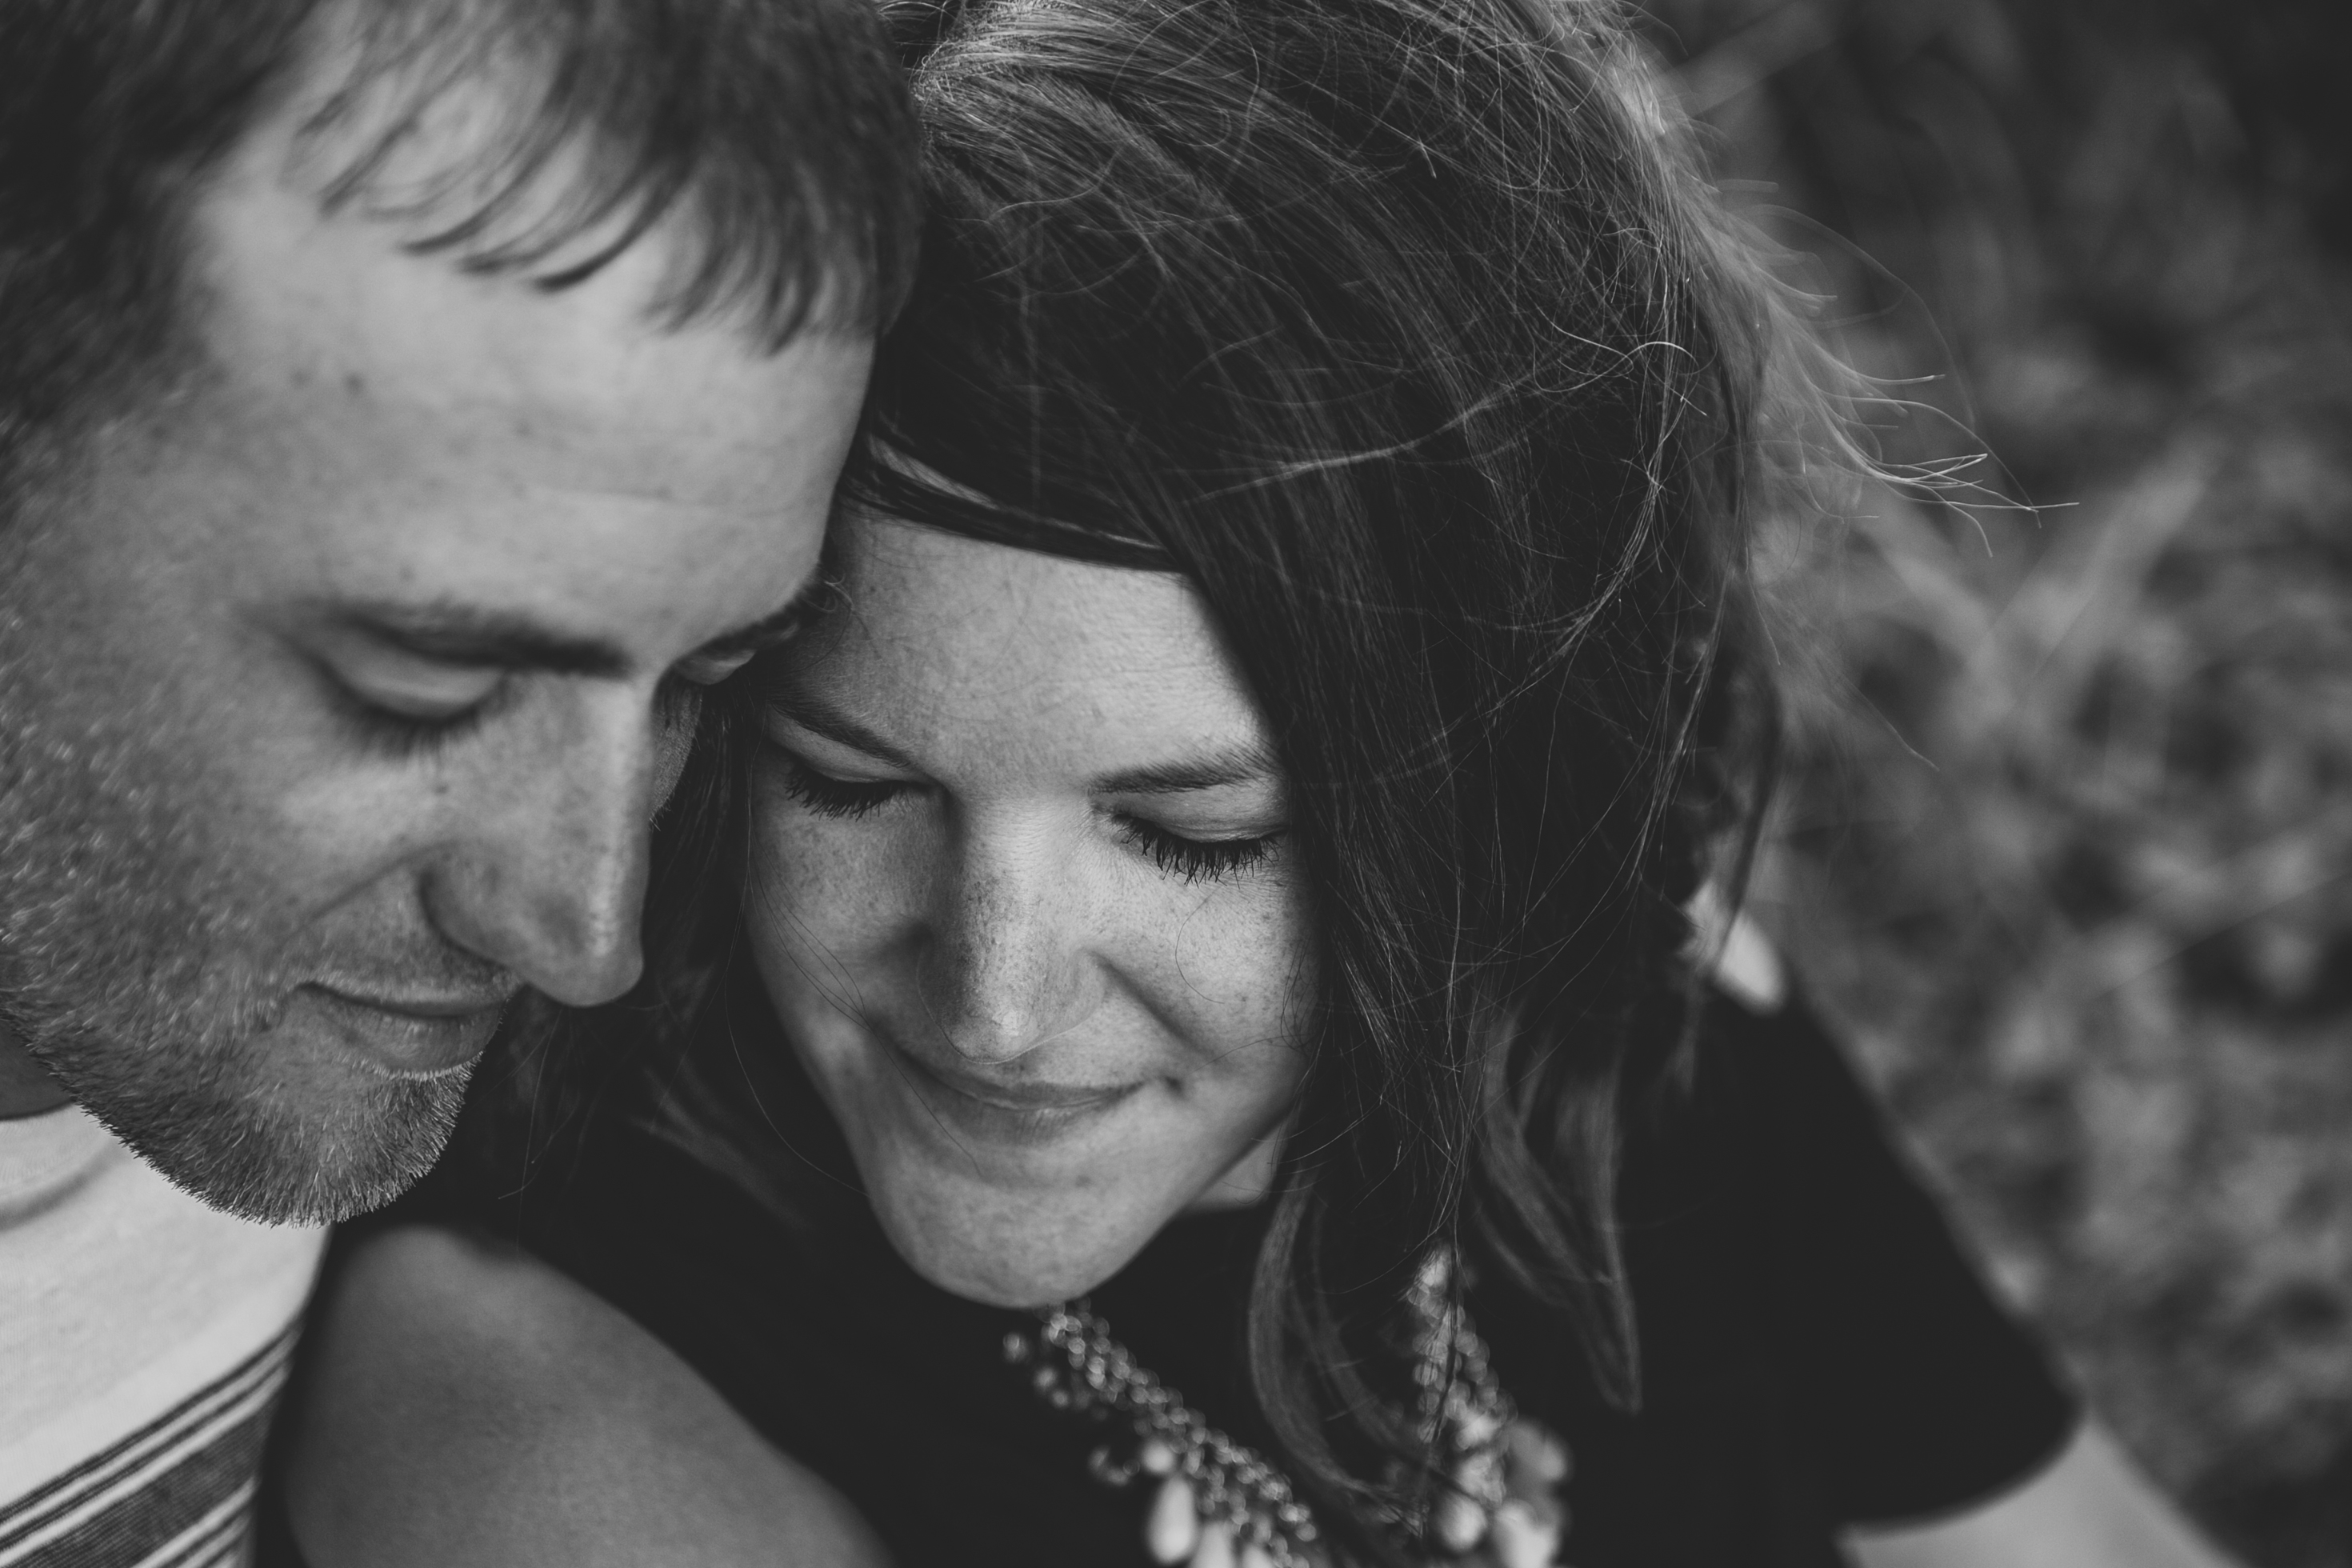 outdoor dubuque engagement session by catherine furlin photography, couple snuggling